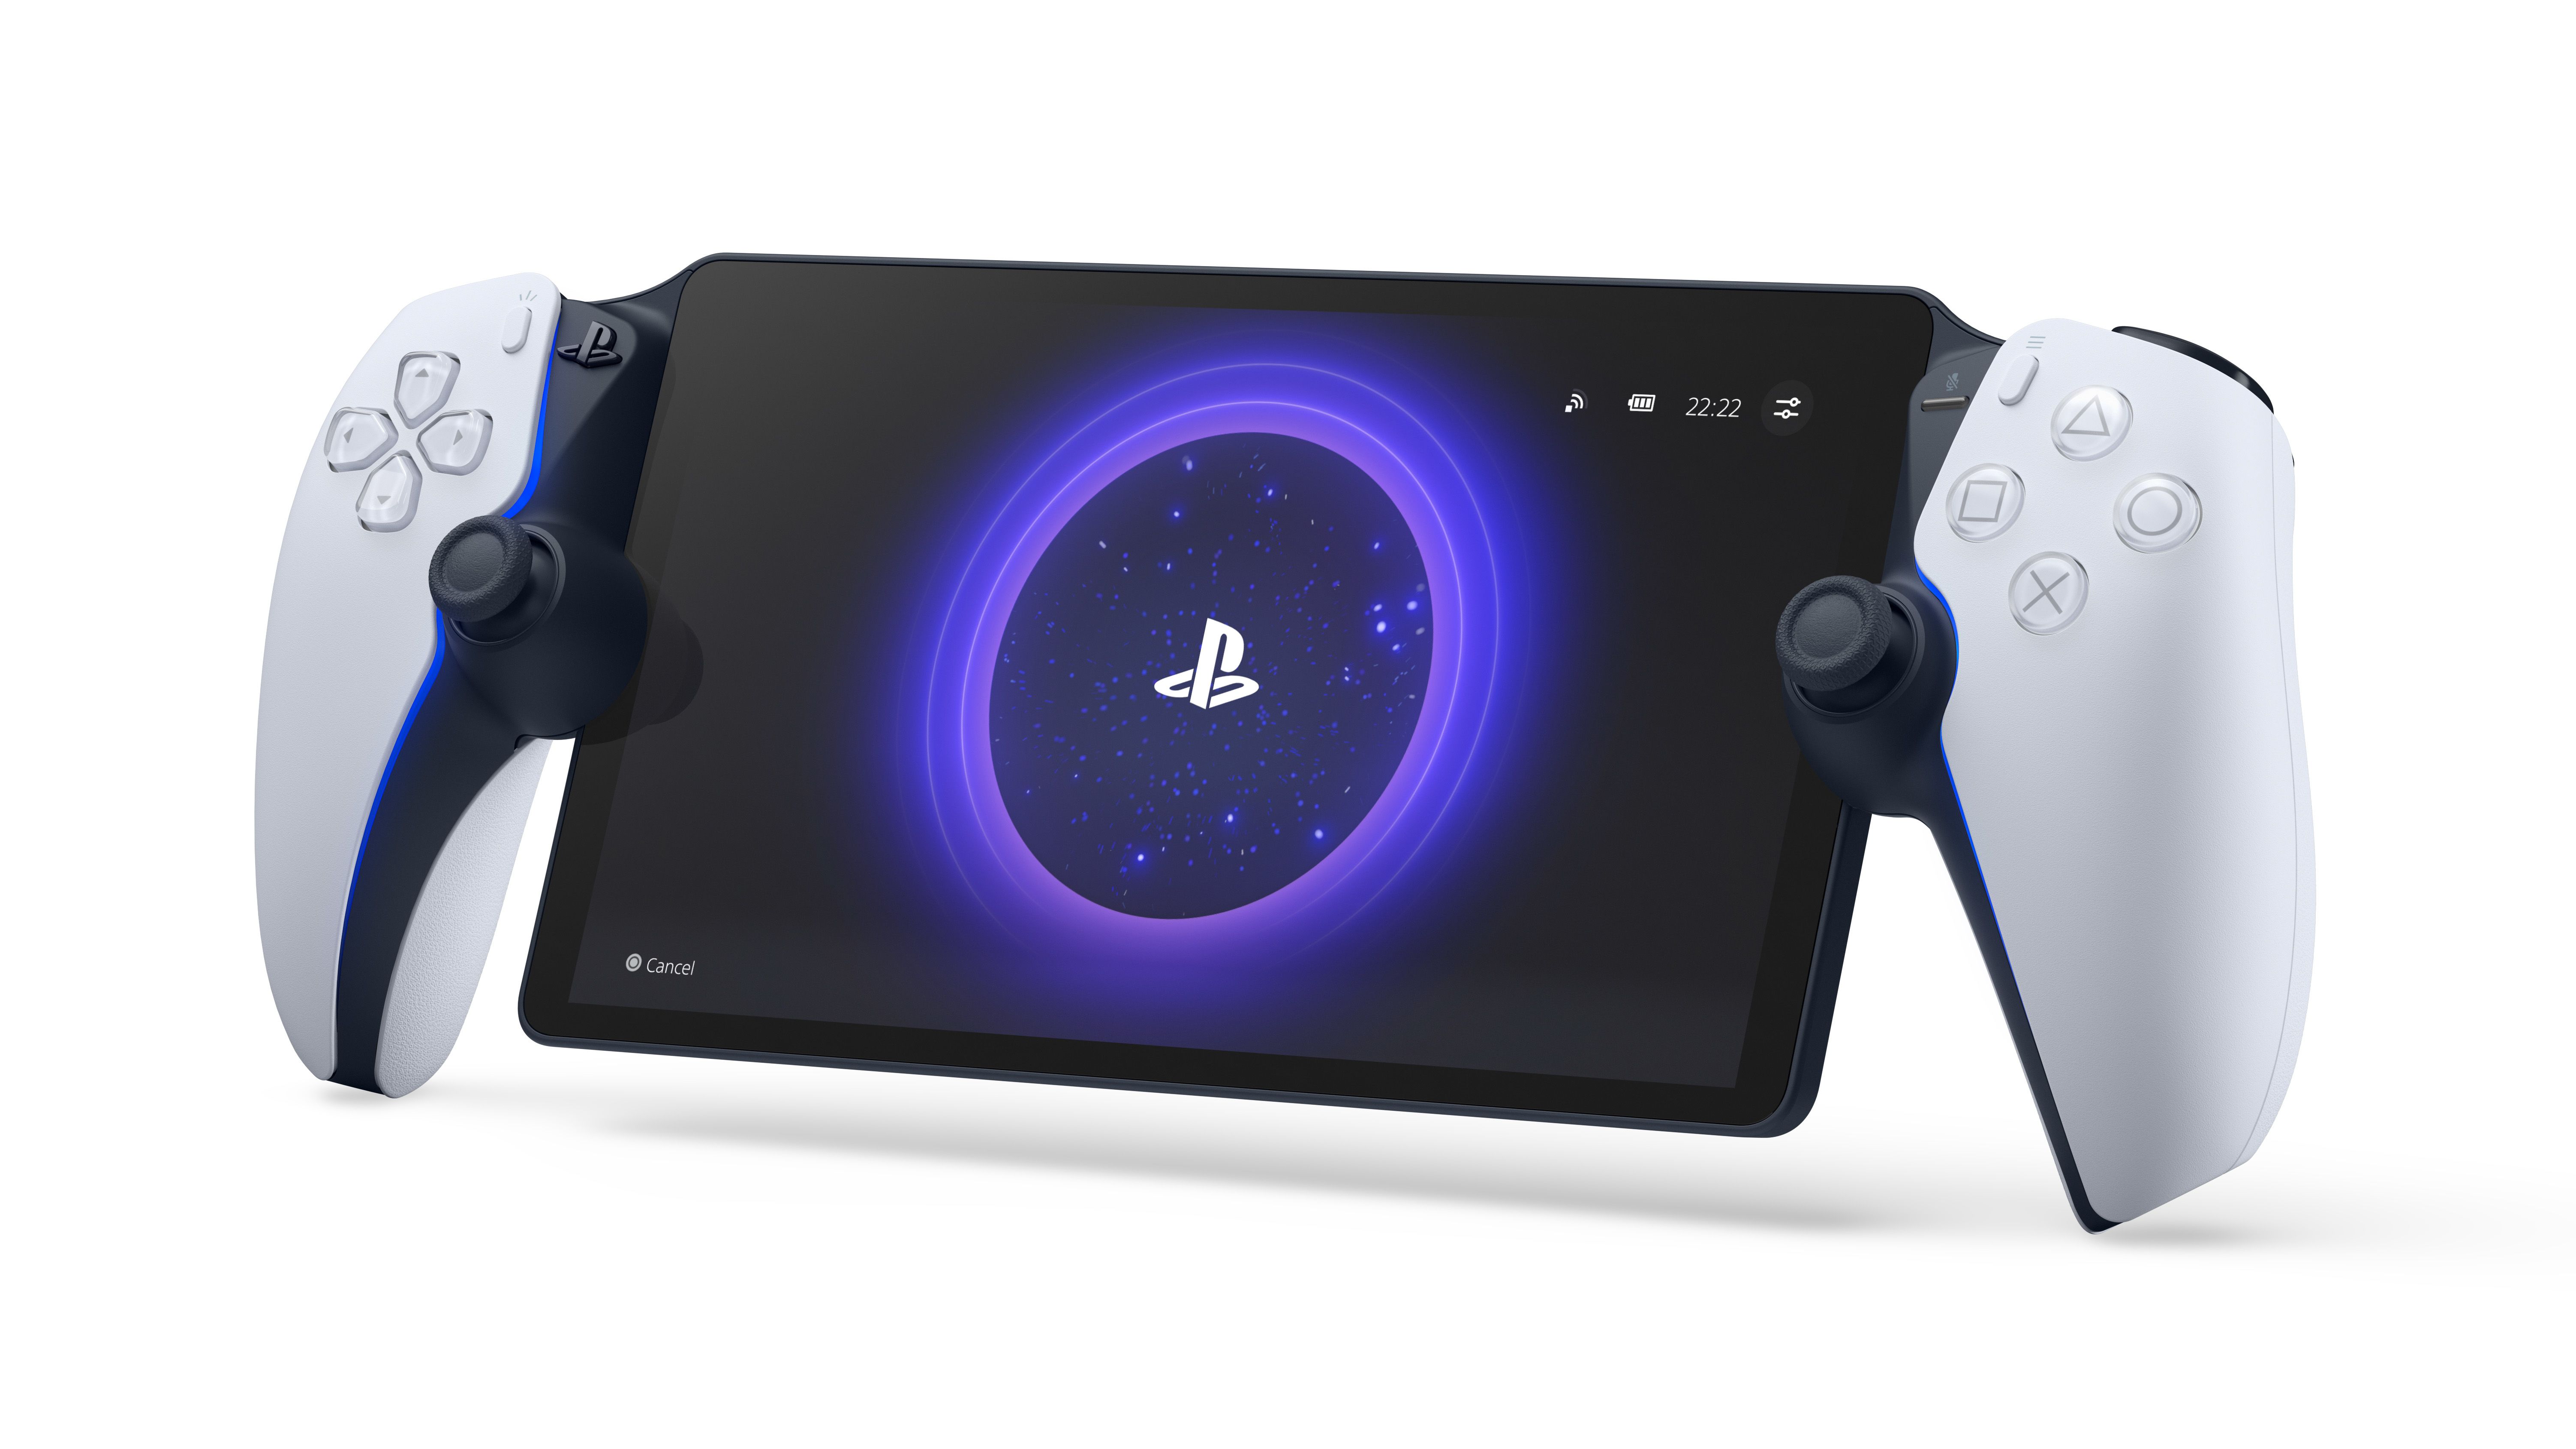 Sony PlayStation Portal: price, availability, and how to preorder